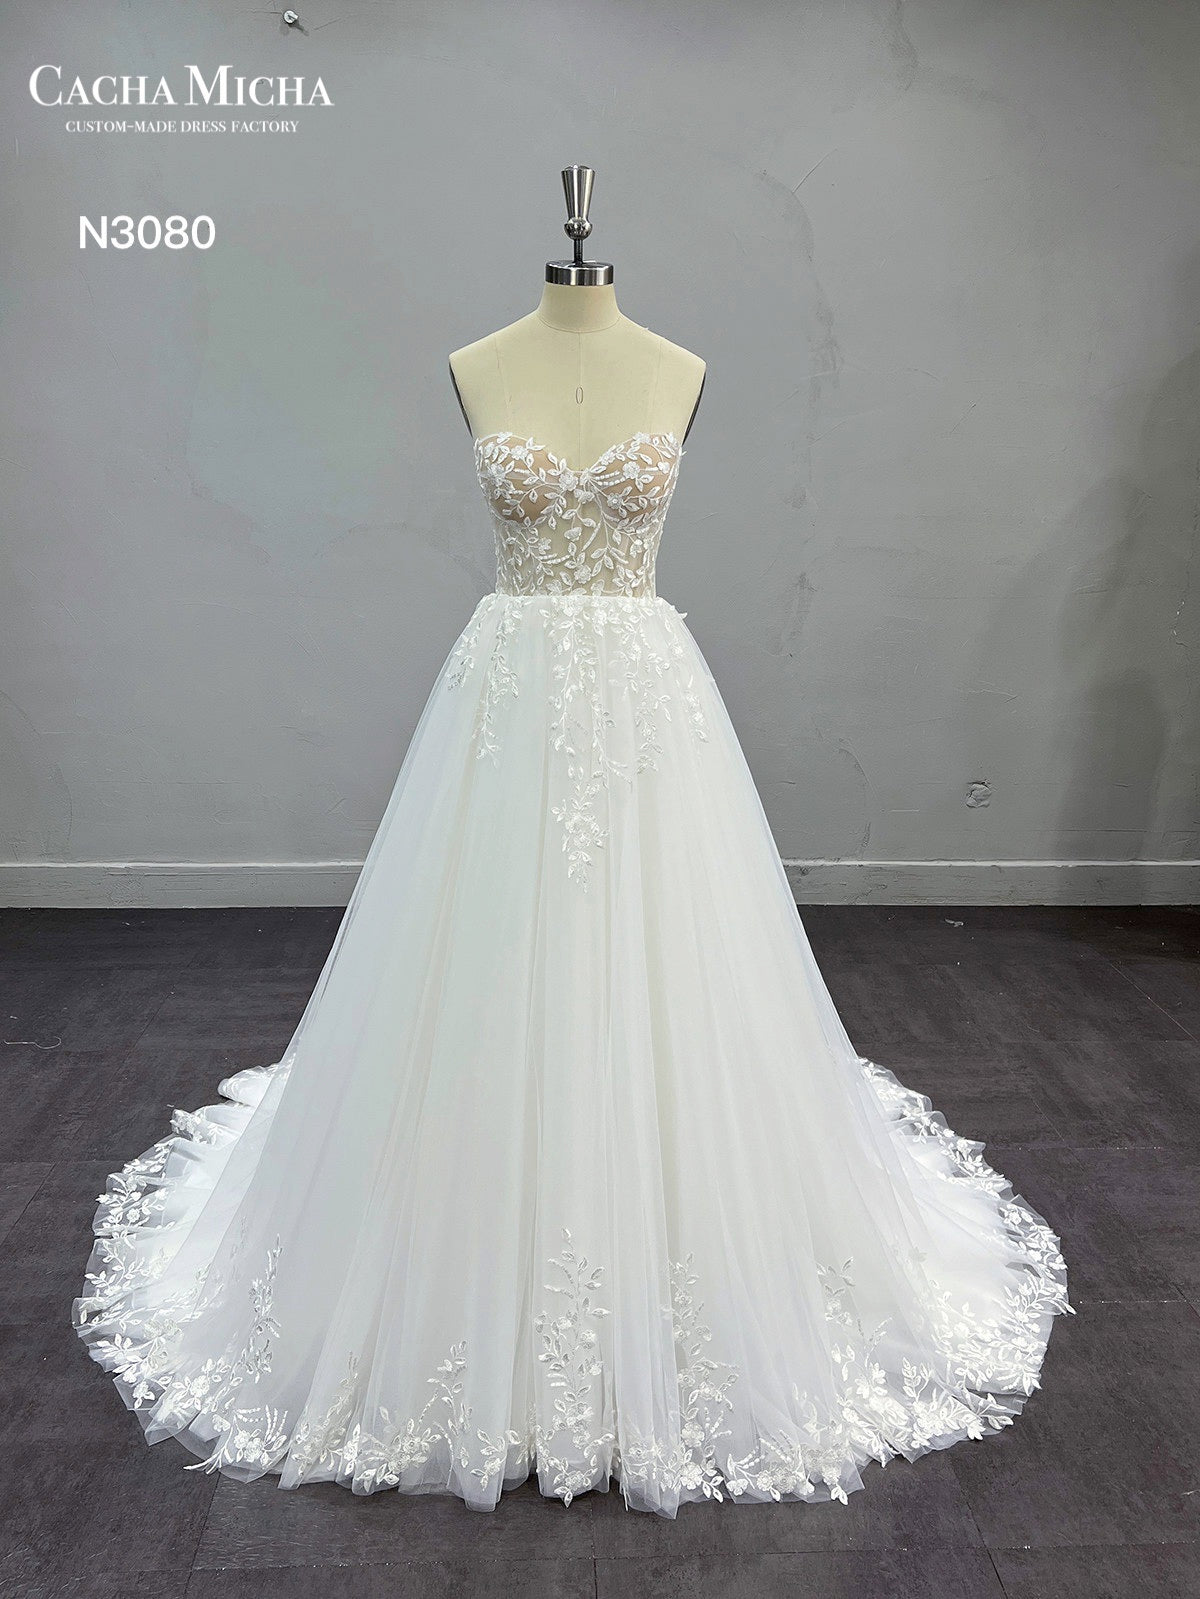 Lace Mermaid Wedding Dress With Ball Gown Over Skirt N3080